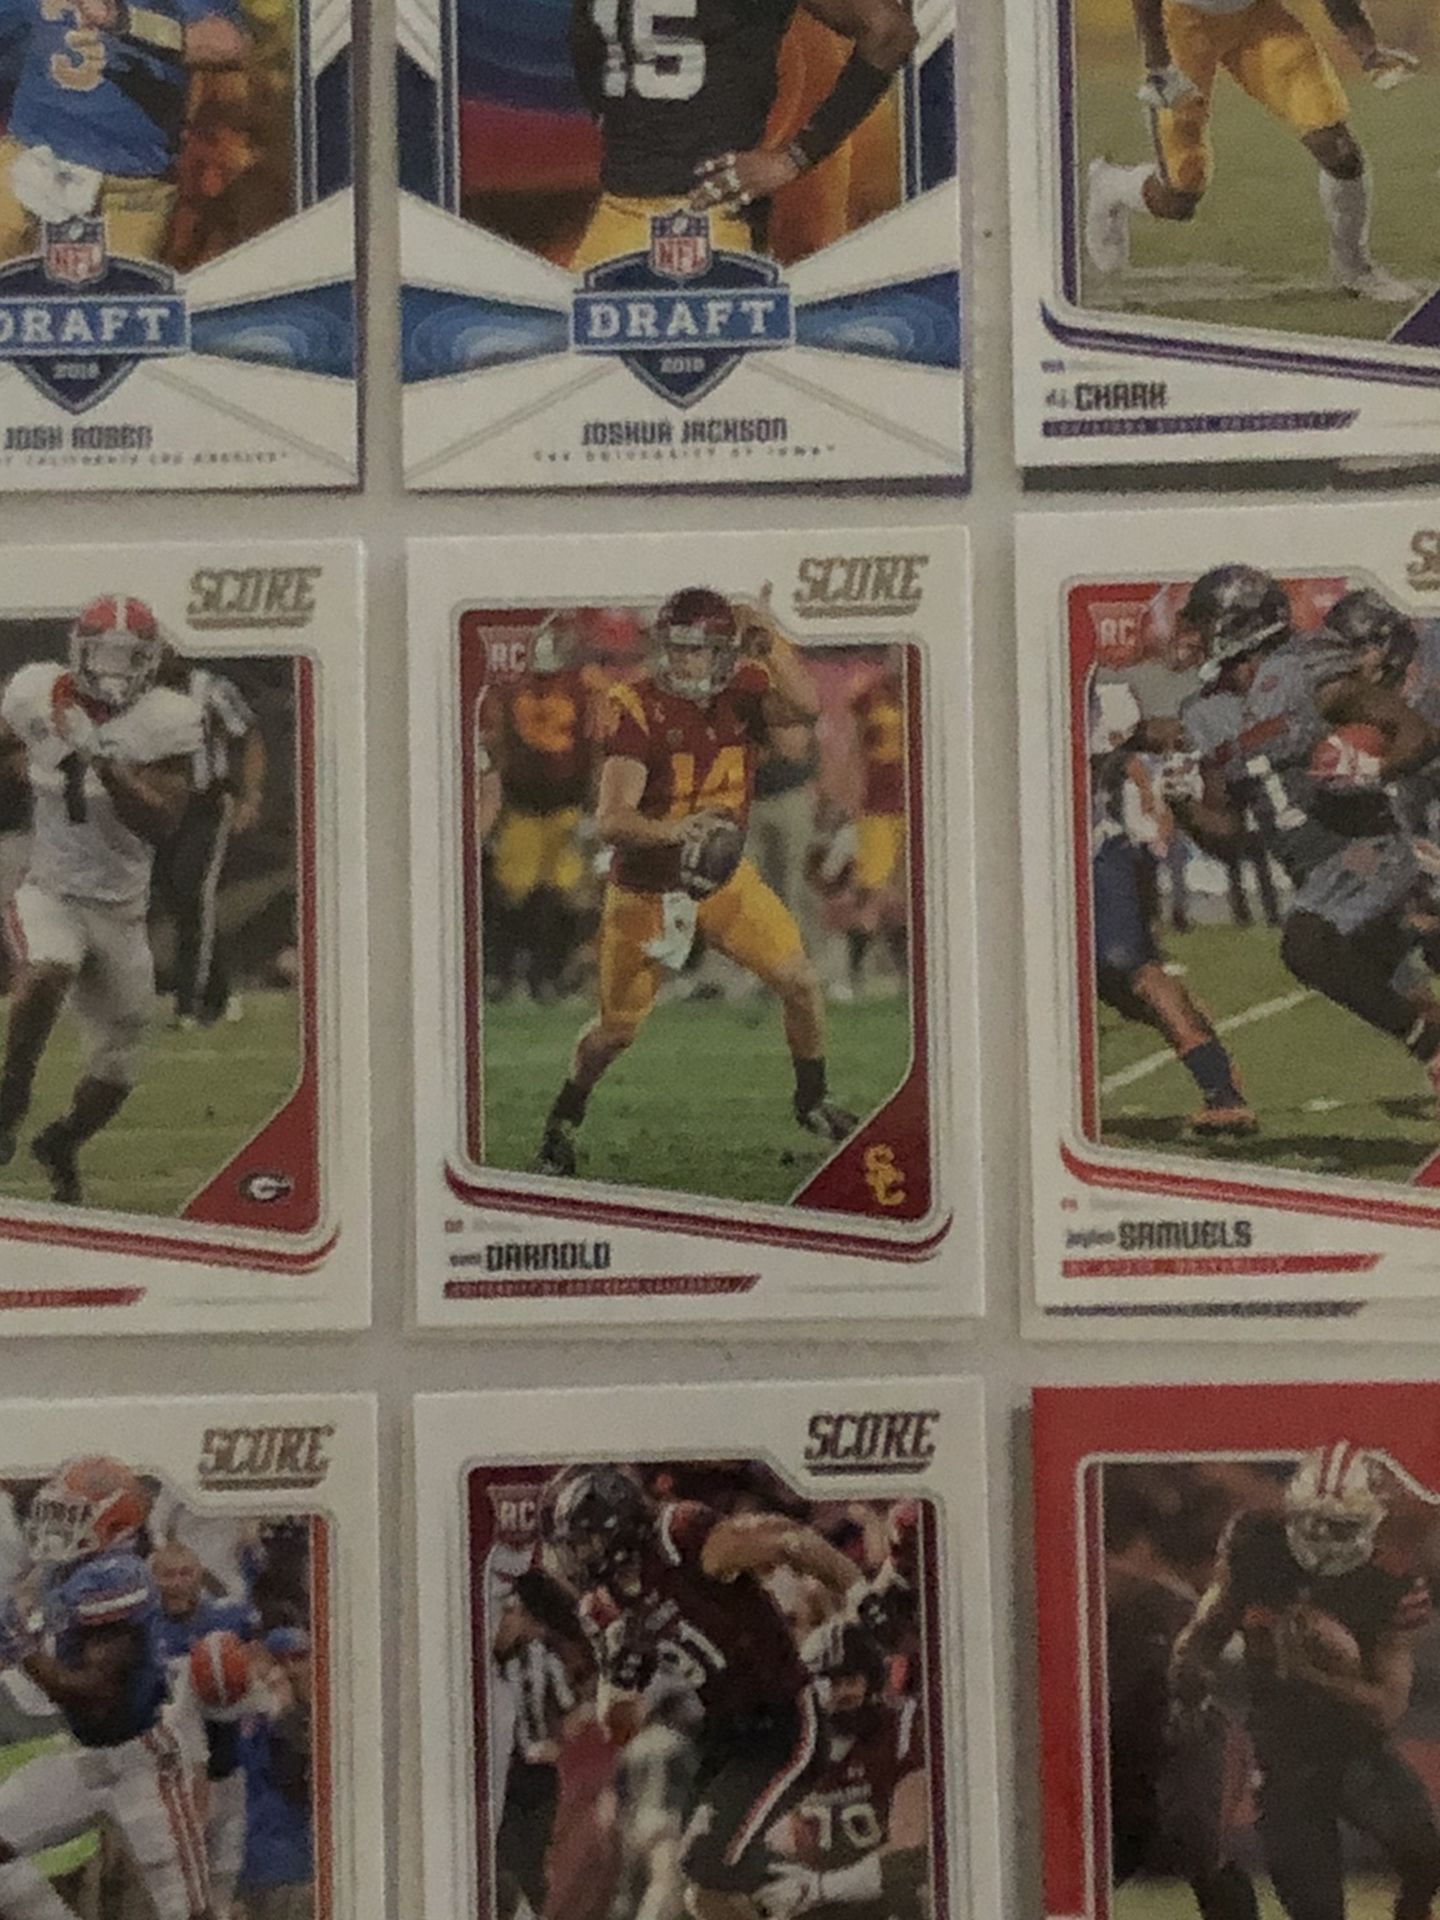 Selling All Score Football Rookies And Inserts . Over 500 Cards With Lots Of Big Name Rookies